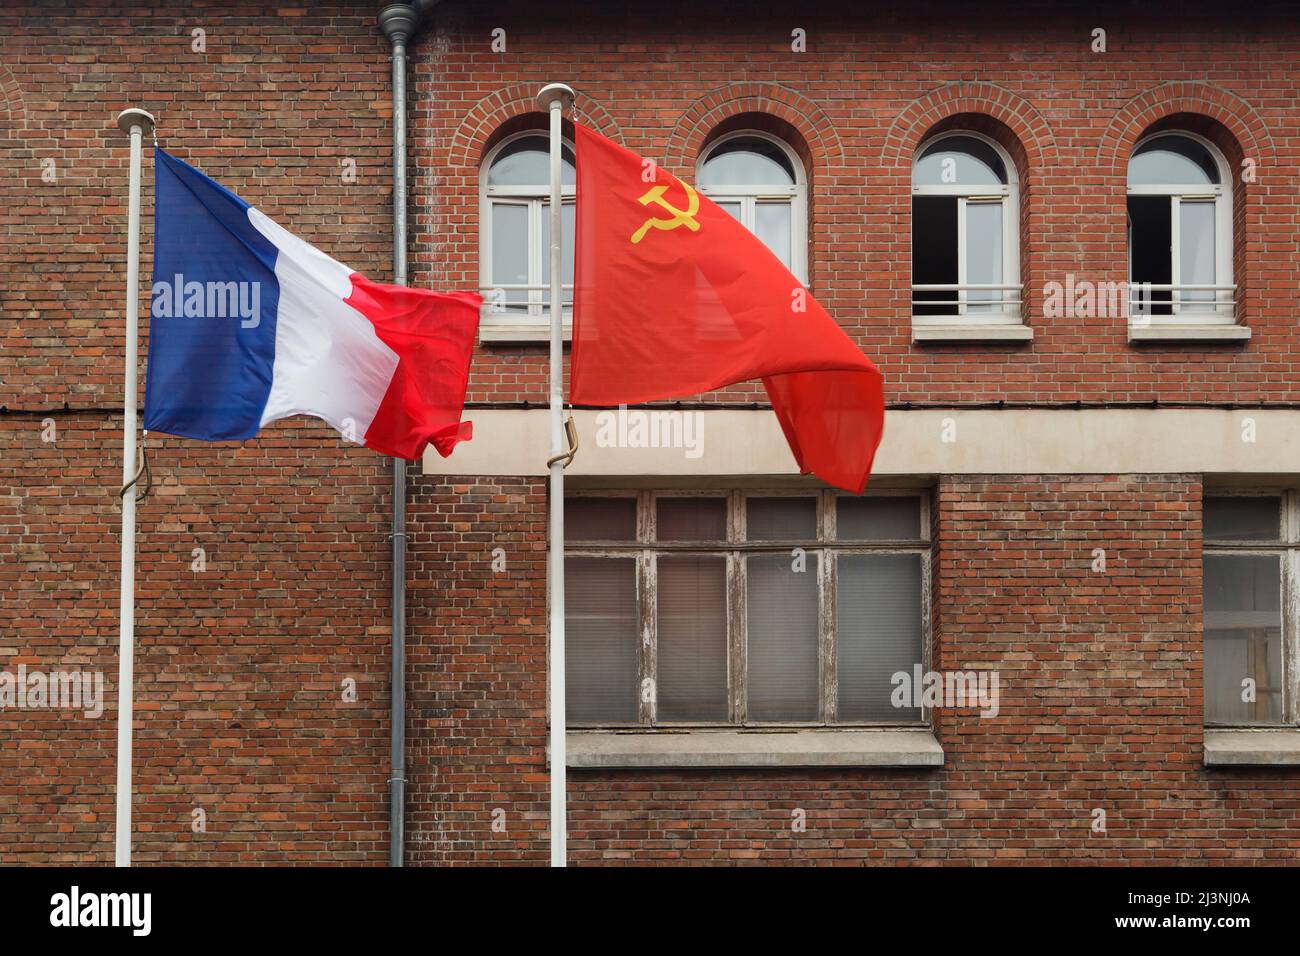 National flags of France and the Soviet Union wave at the entrance to the Museum of the Surrender (Musée de la Reddition) in Reims, France. The first German Instrument of Surrender that ended World War II in Europe was signed in this building at 02:41 Central European Time (CET) on 7 May 1945. Stock Photo